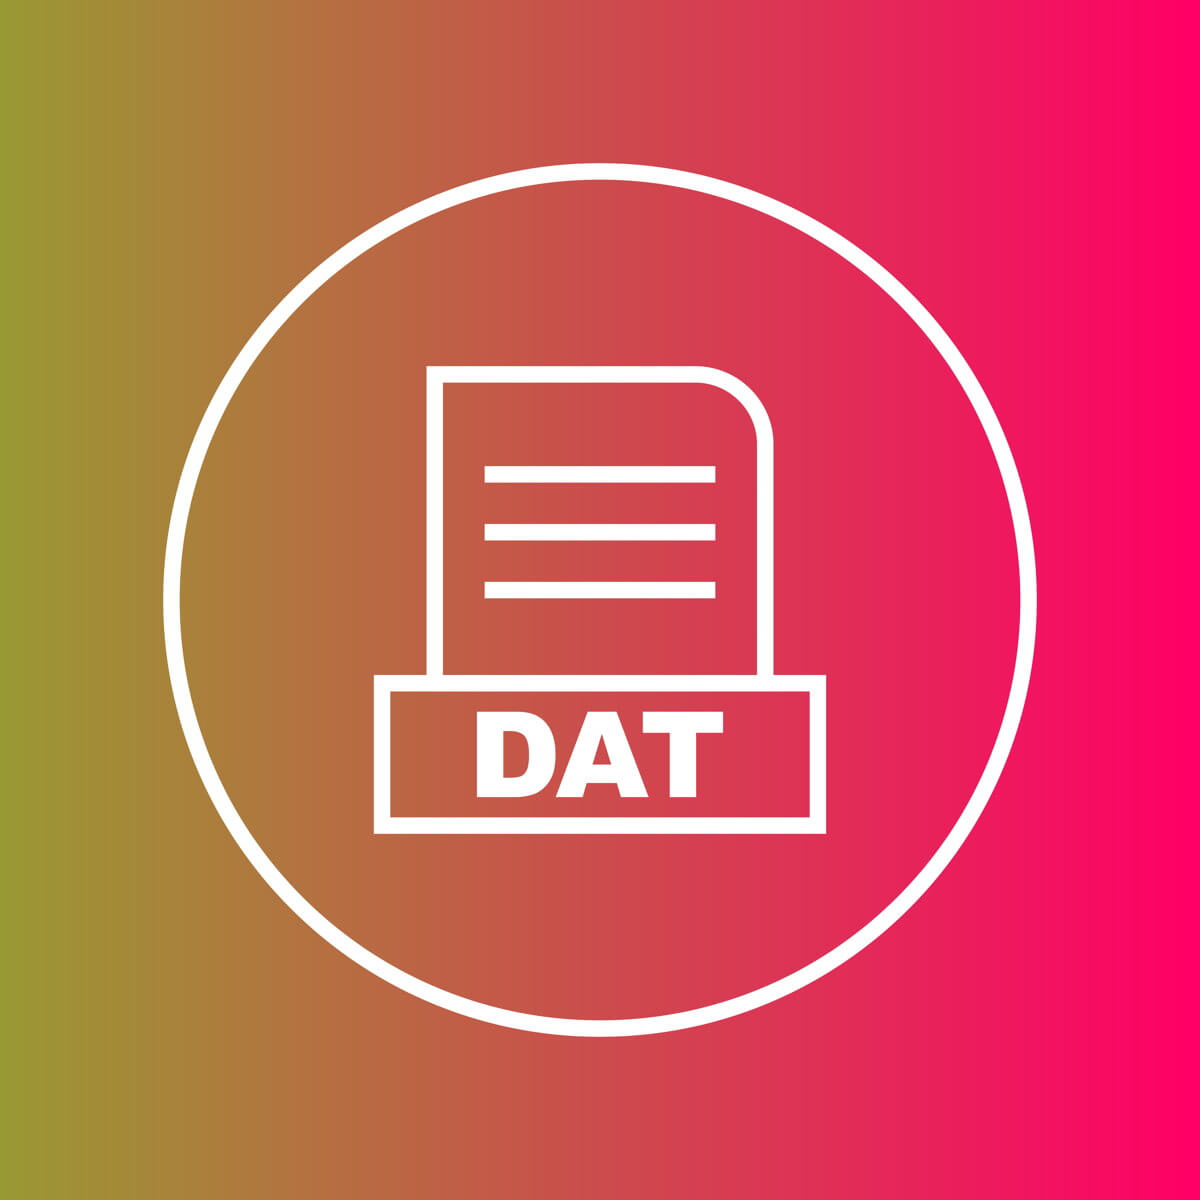 DAT file type - how to open